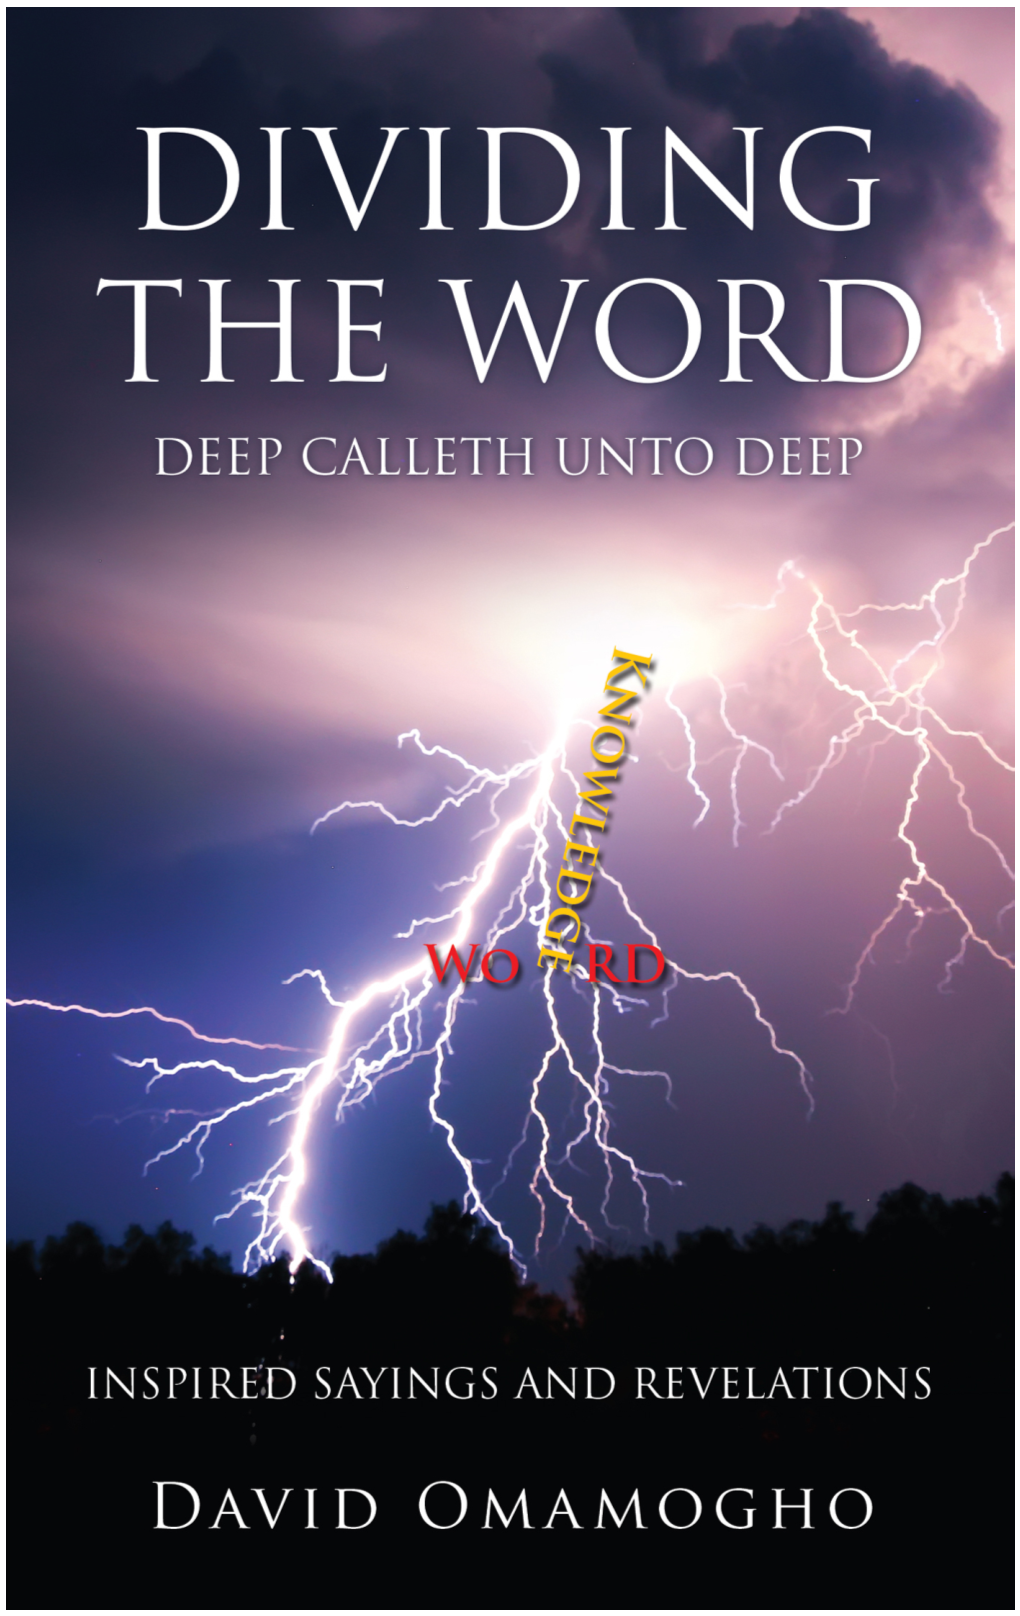 Dividing the Word, Deep Calleth Unto Deep, Inspired Sayings and Revelations